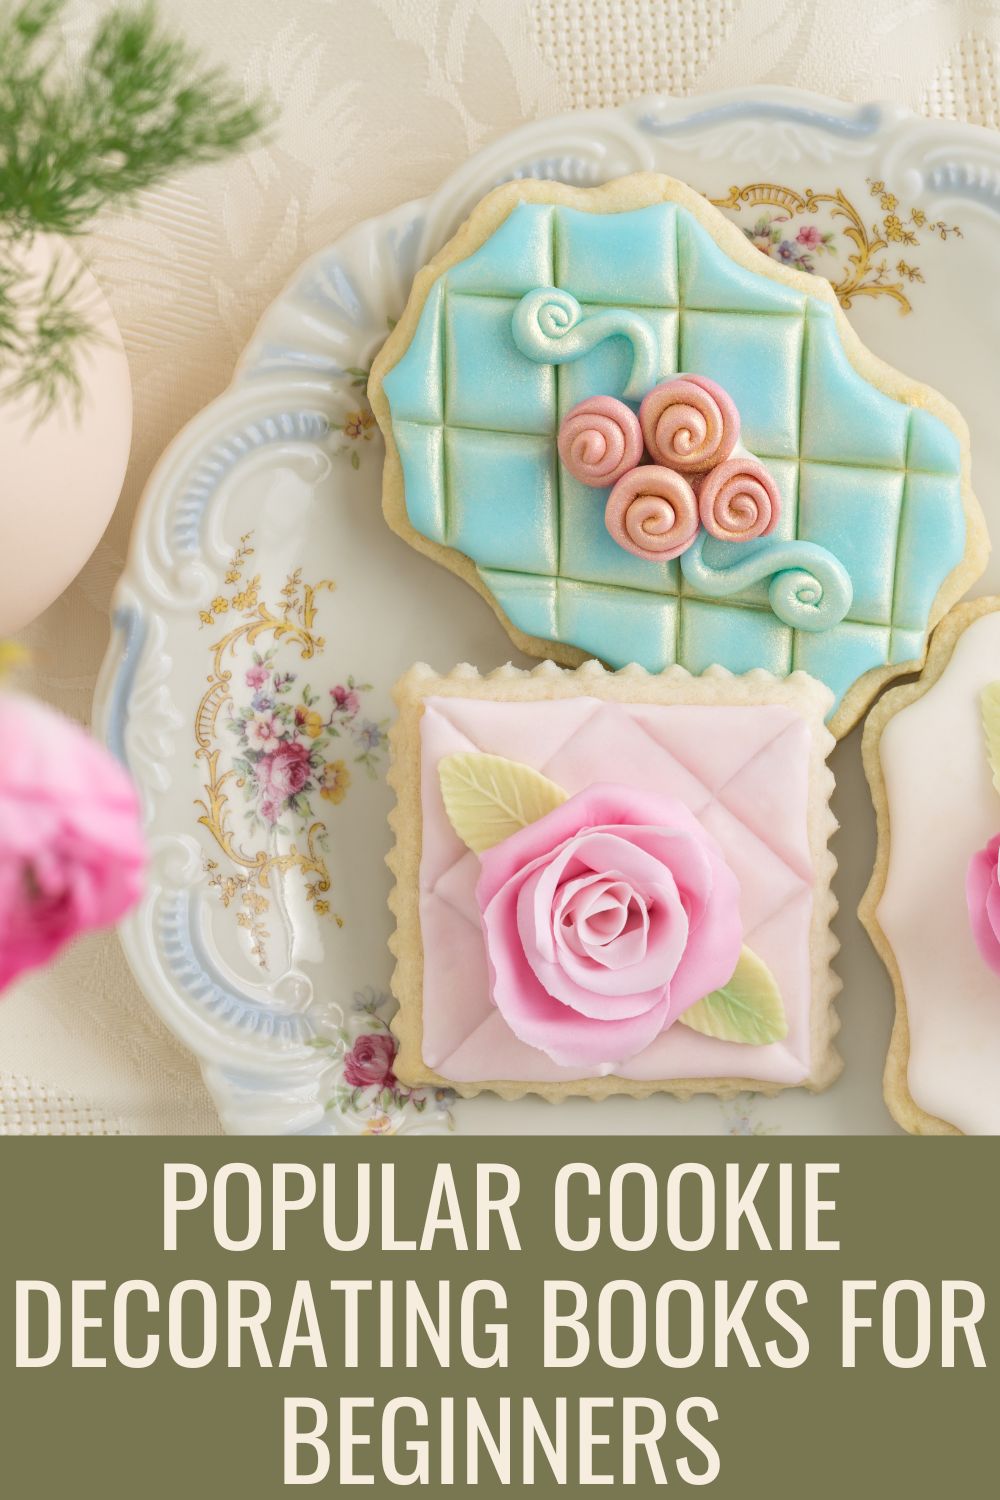 Popular cookie decorating books for beginners.